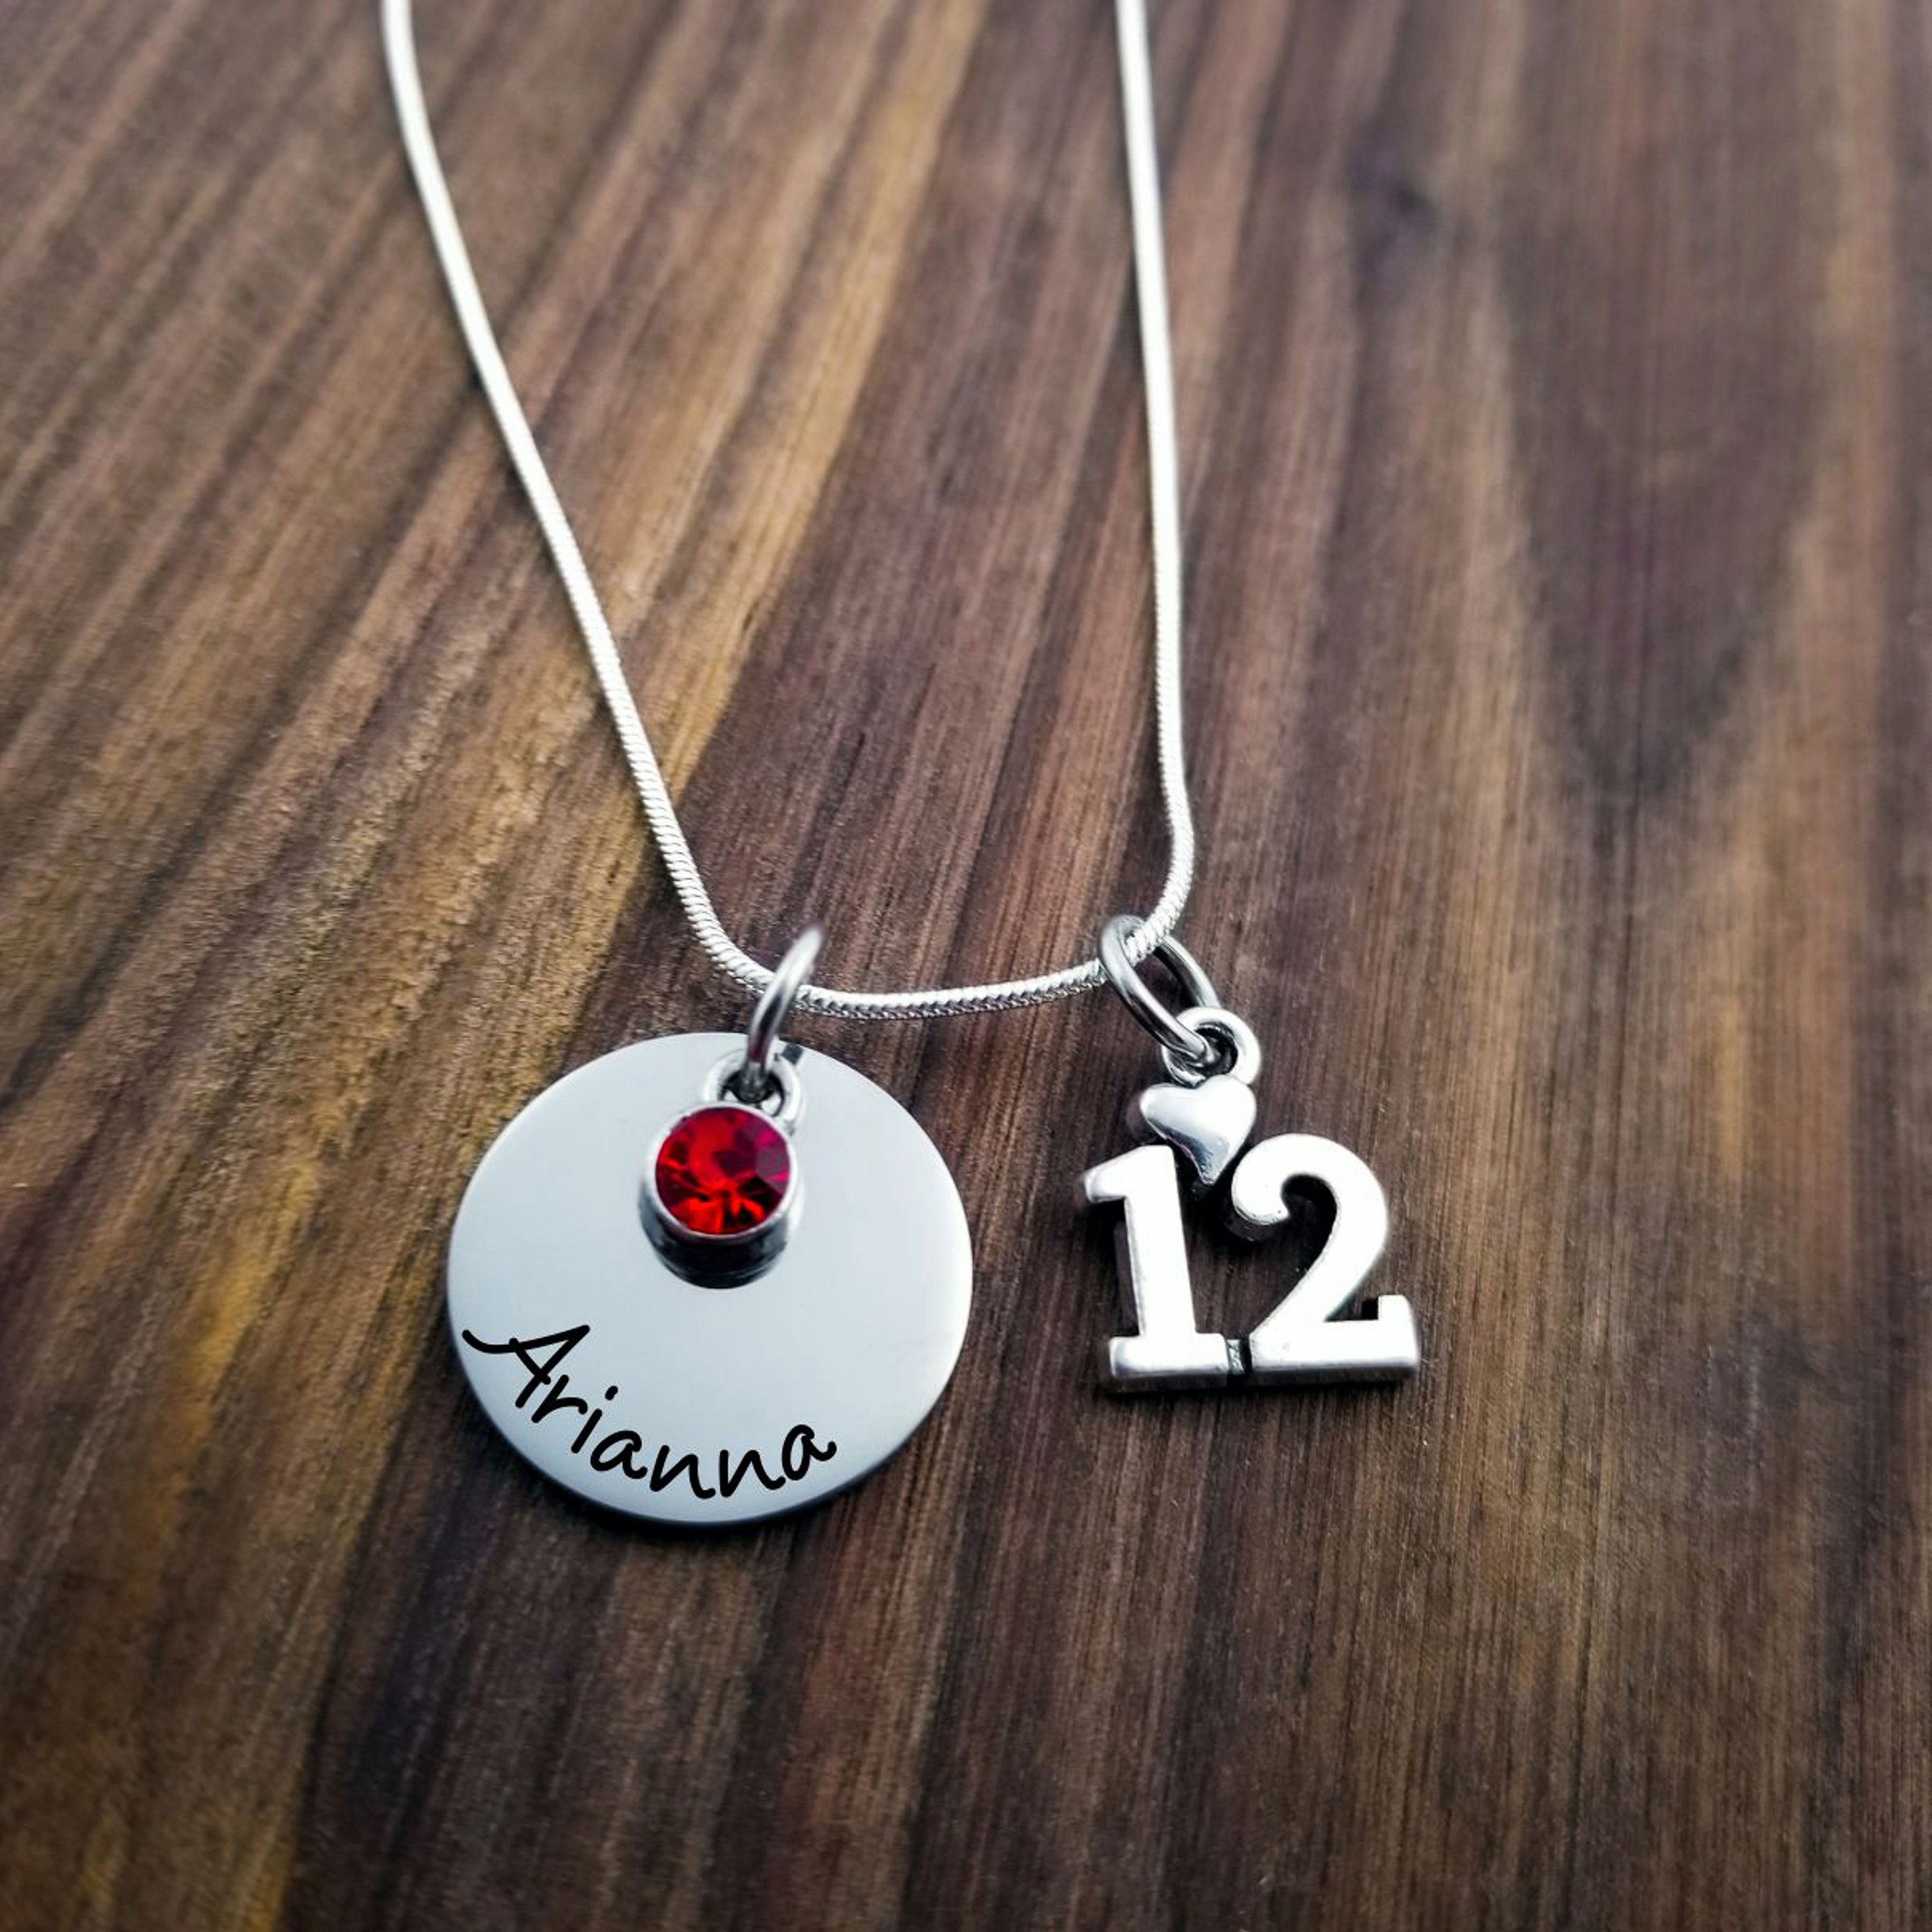 12th Birthday Gift, Birthday Gift for 12 Year Old Girl, 12th Birthday Necklace, Personalized Gift, Custom Jewelry, Gift for 12th Birthday